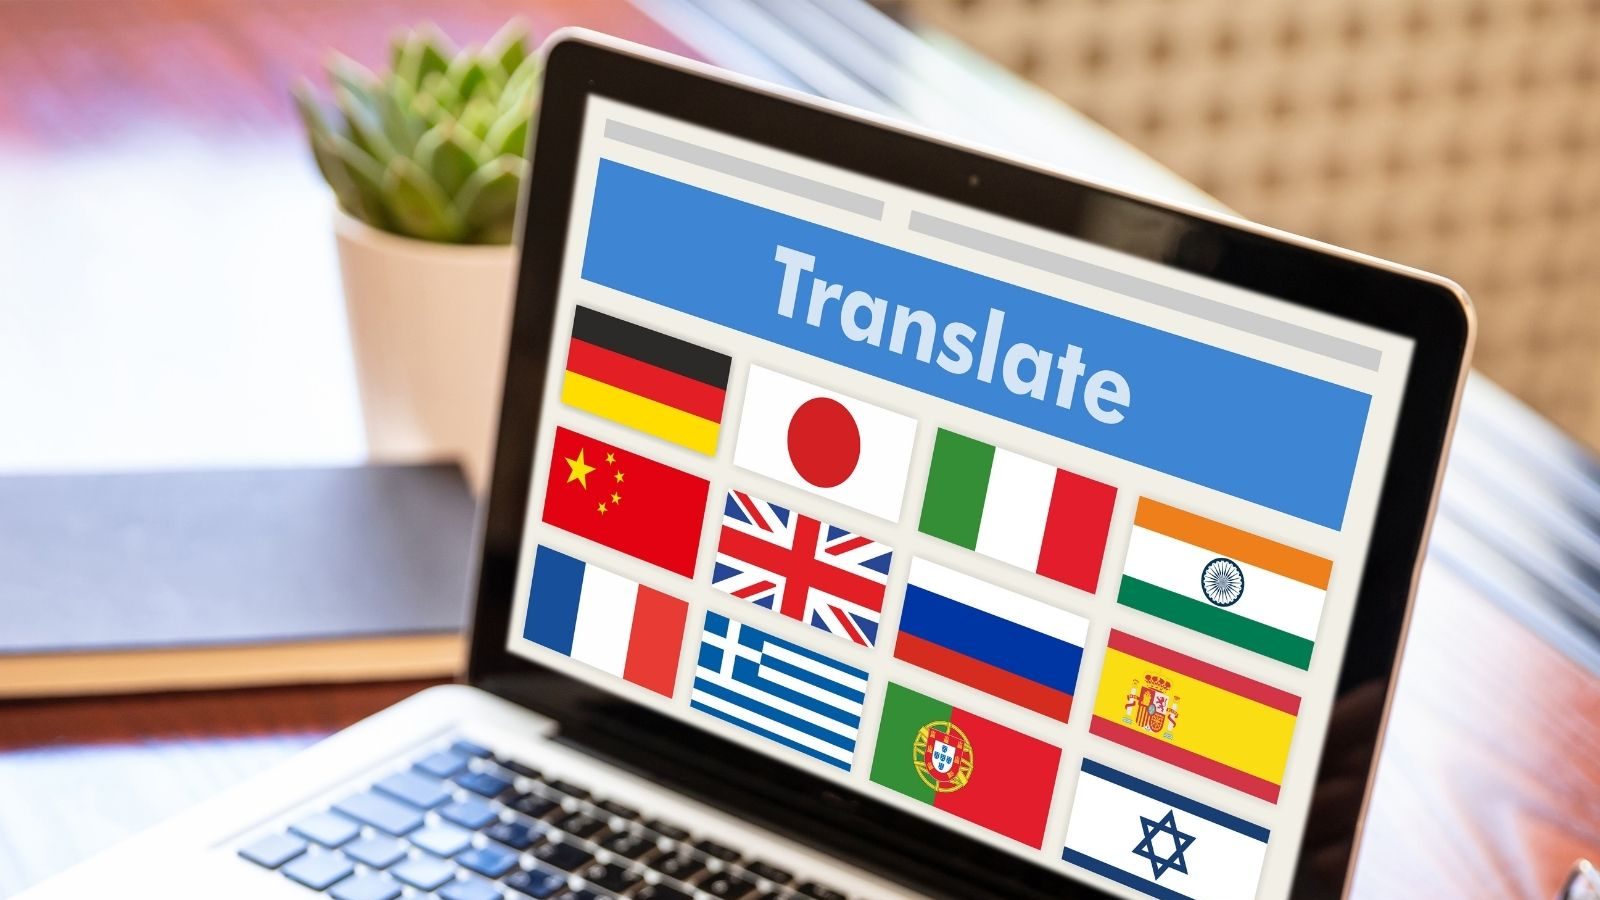 International Translation Day 2021: Theme, History and Significance